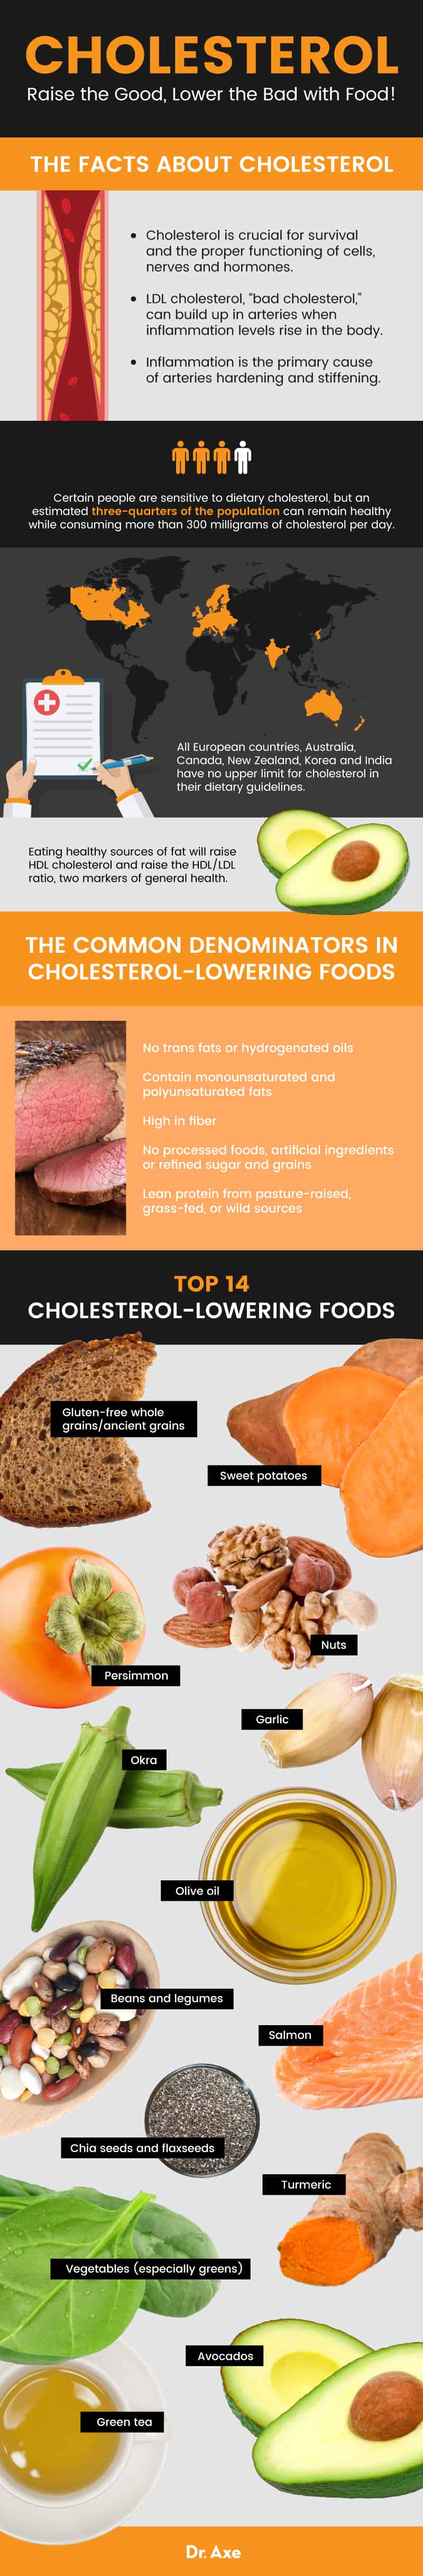 Foods that lower cholesterol